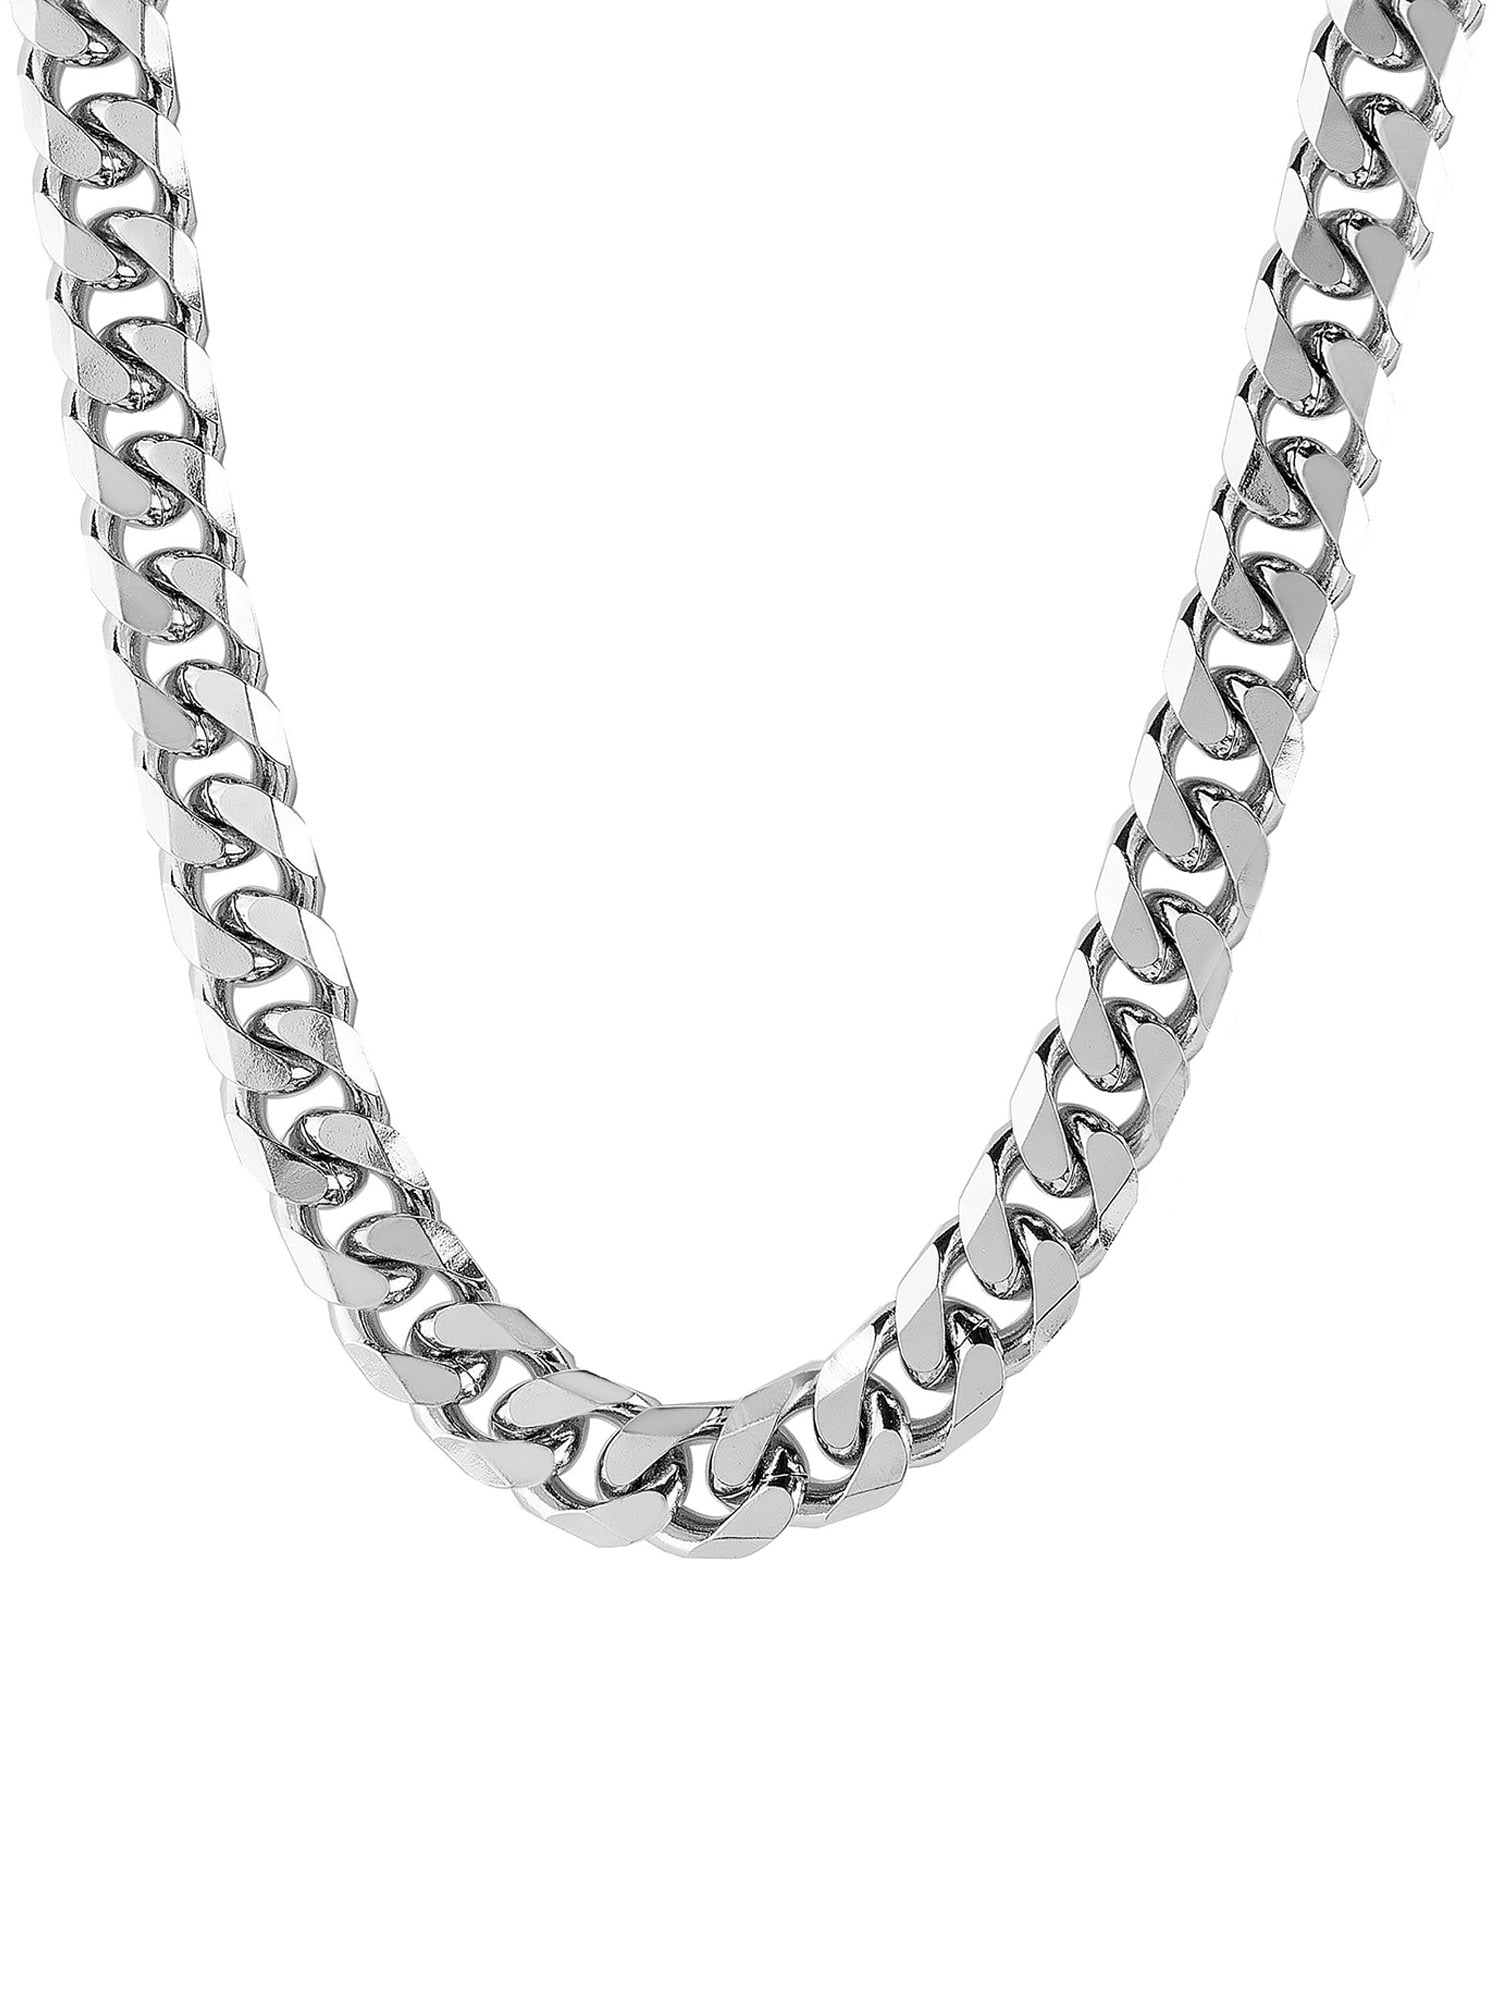 24"MEN Stainless Steel 10mm Silver Cross Flat Byzantine Box Link Chain Necklace